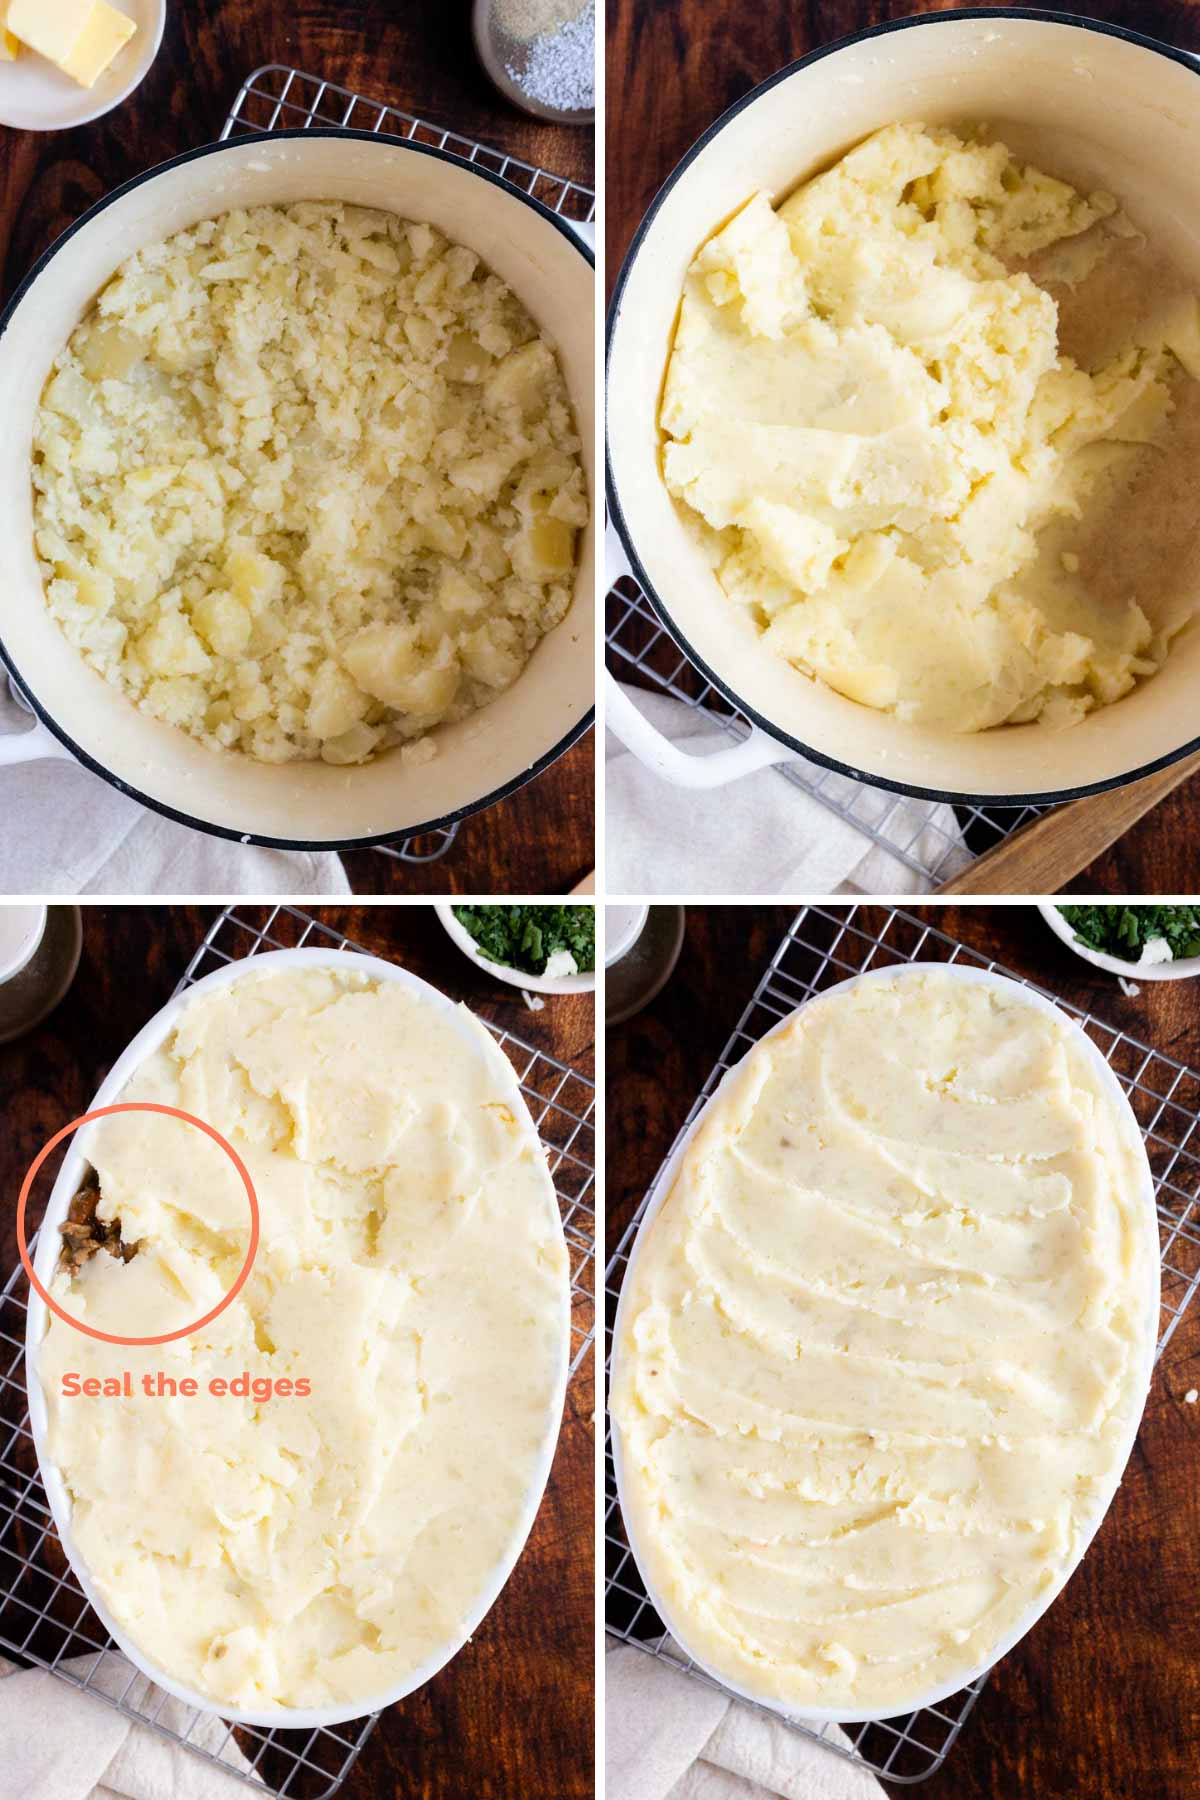 Making the mashed potatoes and topping the pie.